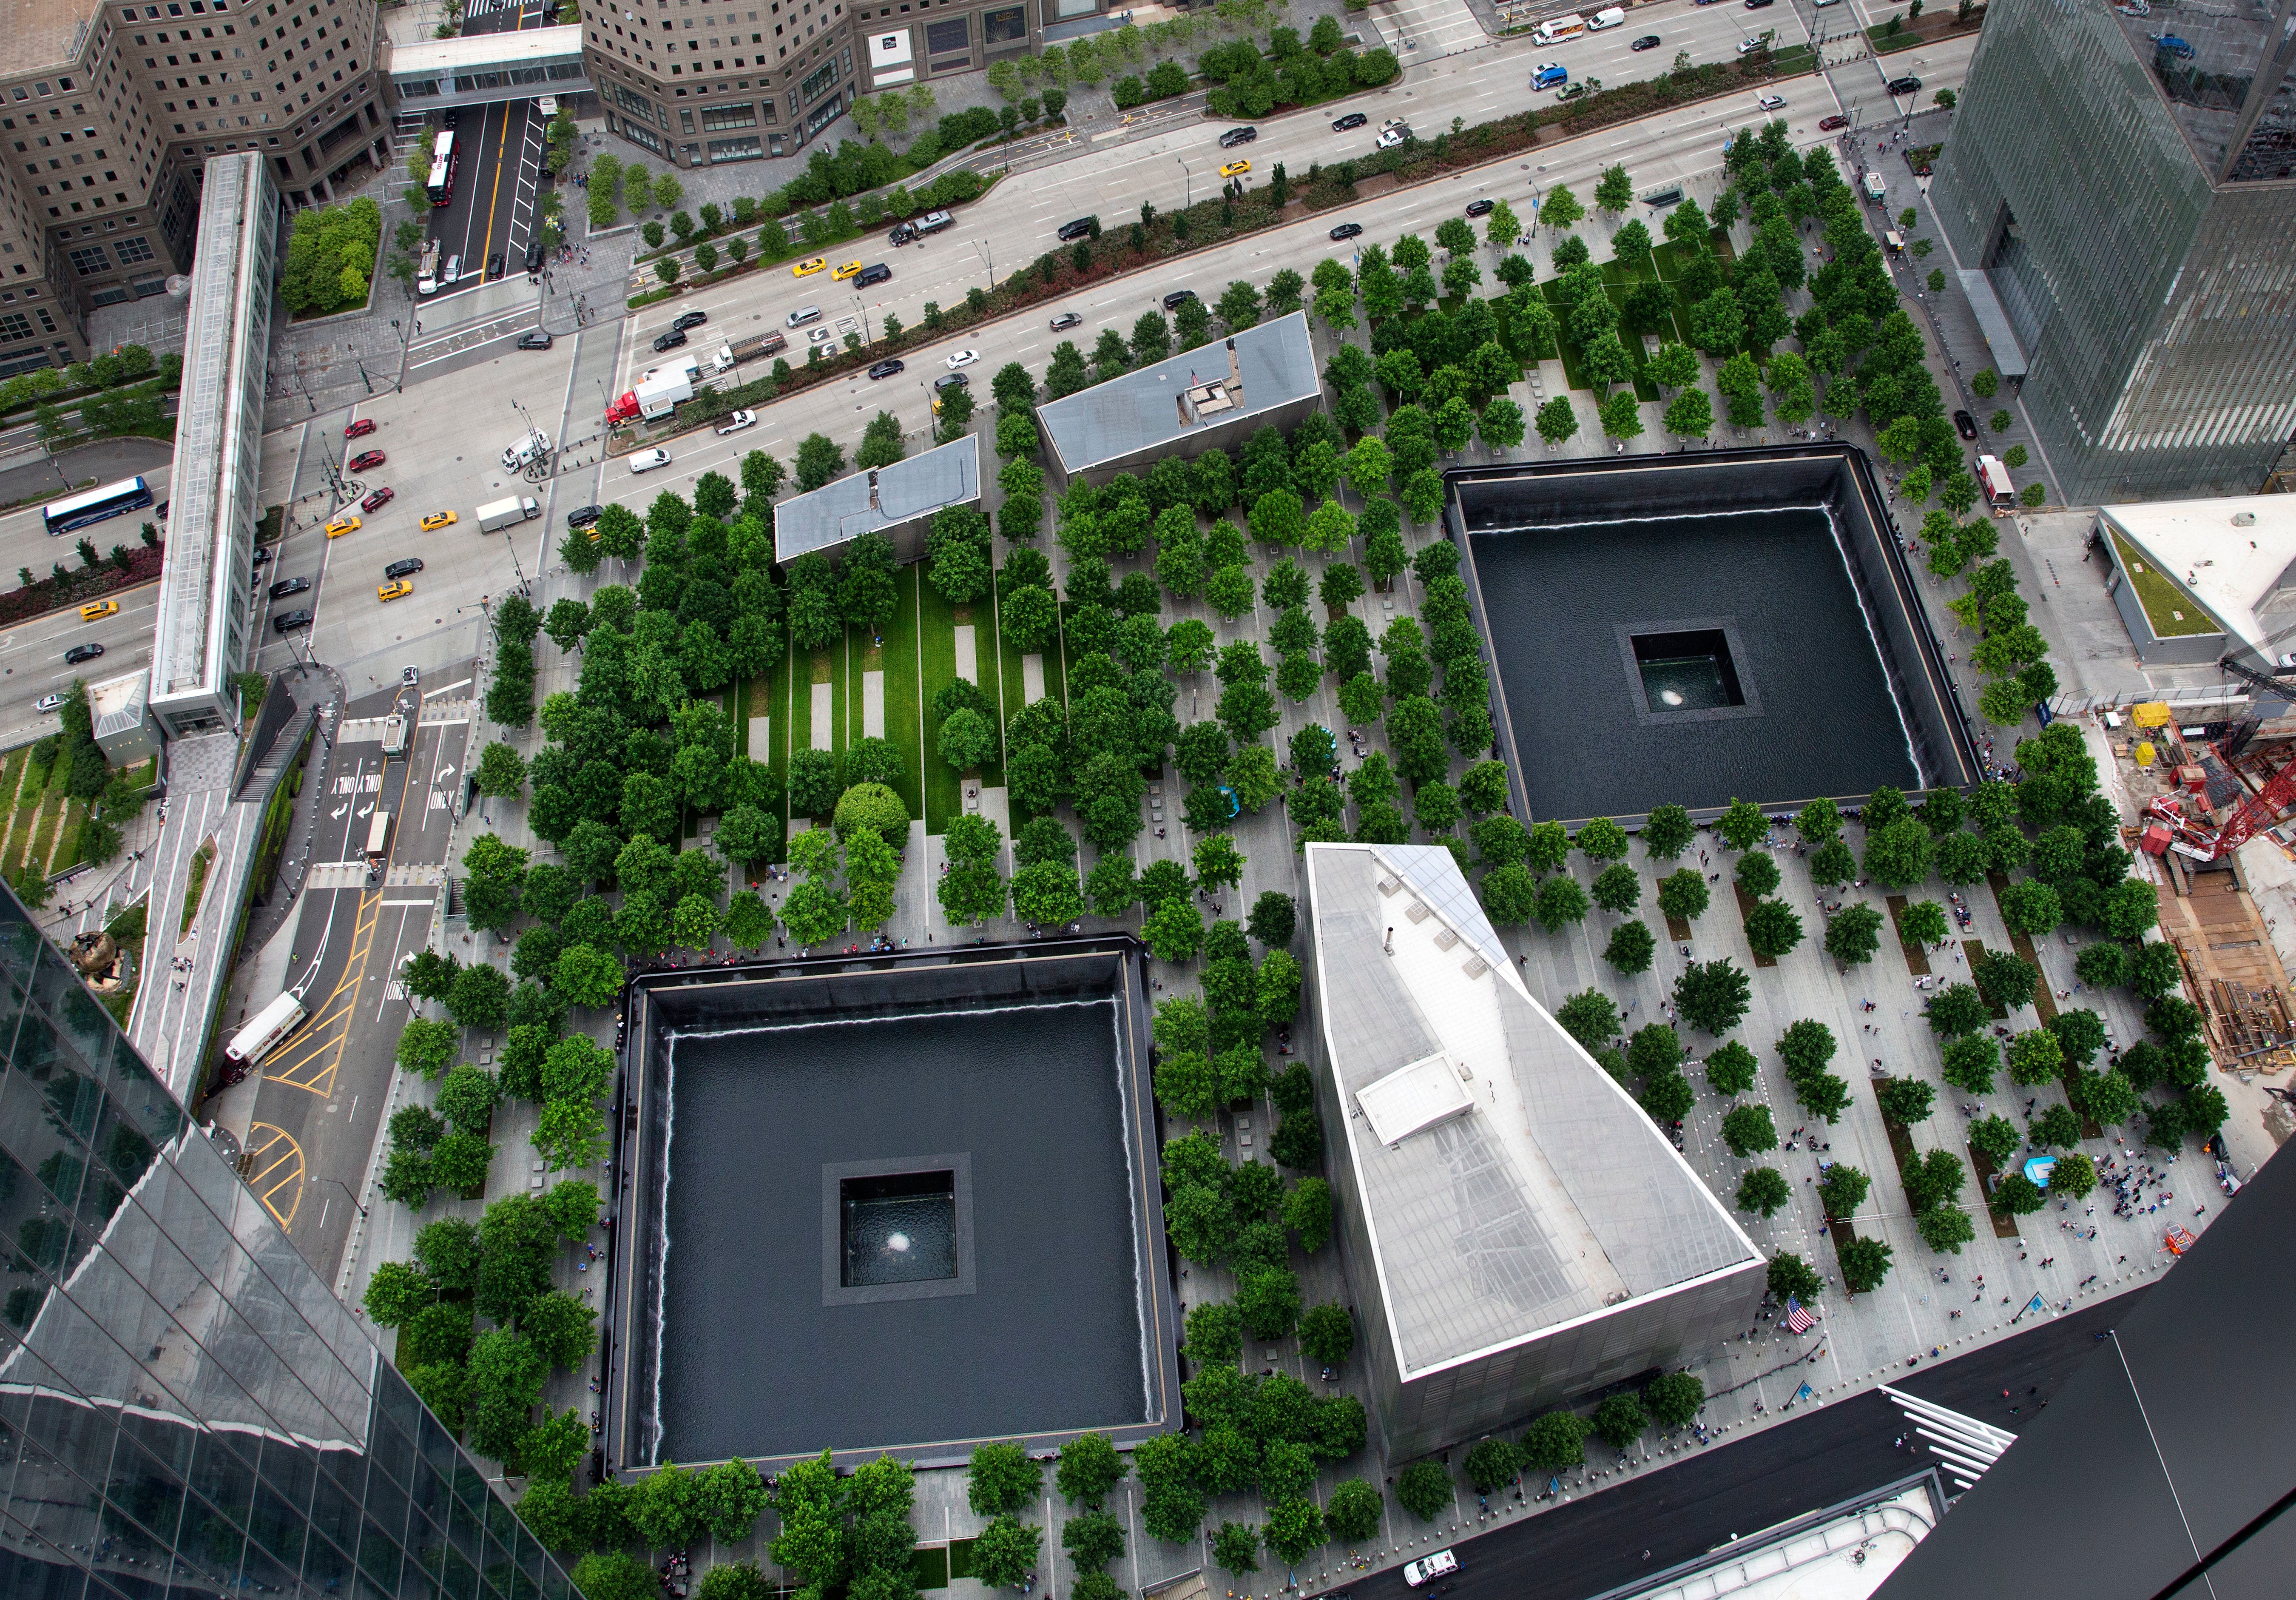 File image: An aerial view of the 9/11 memorial